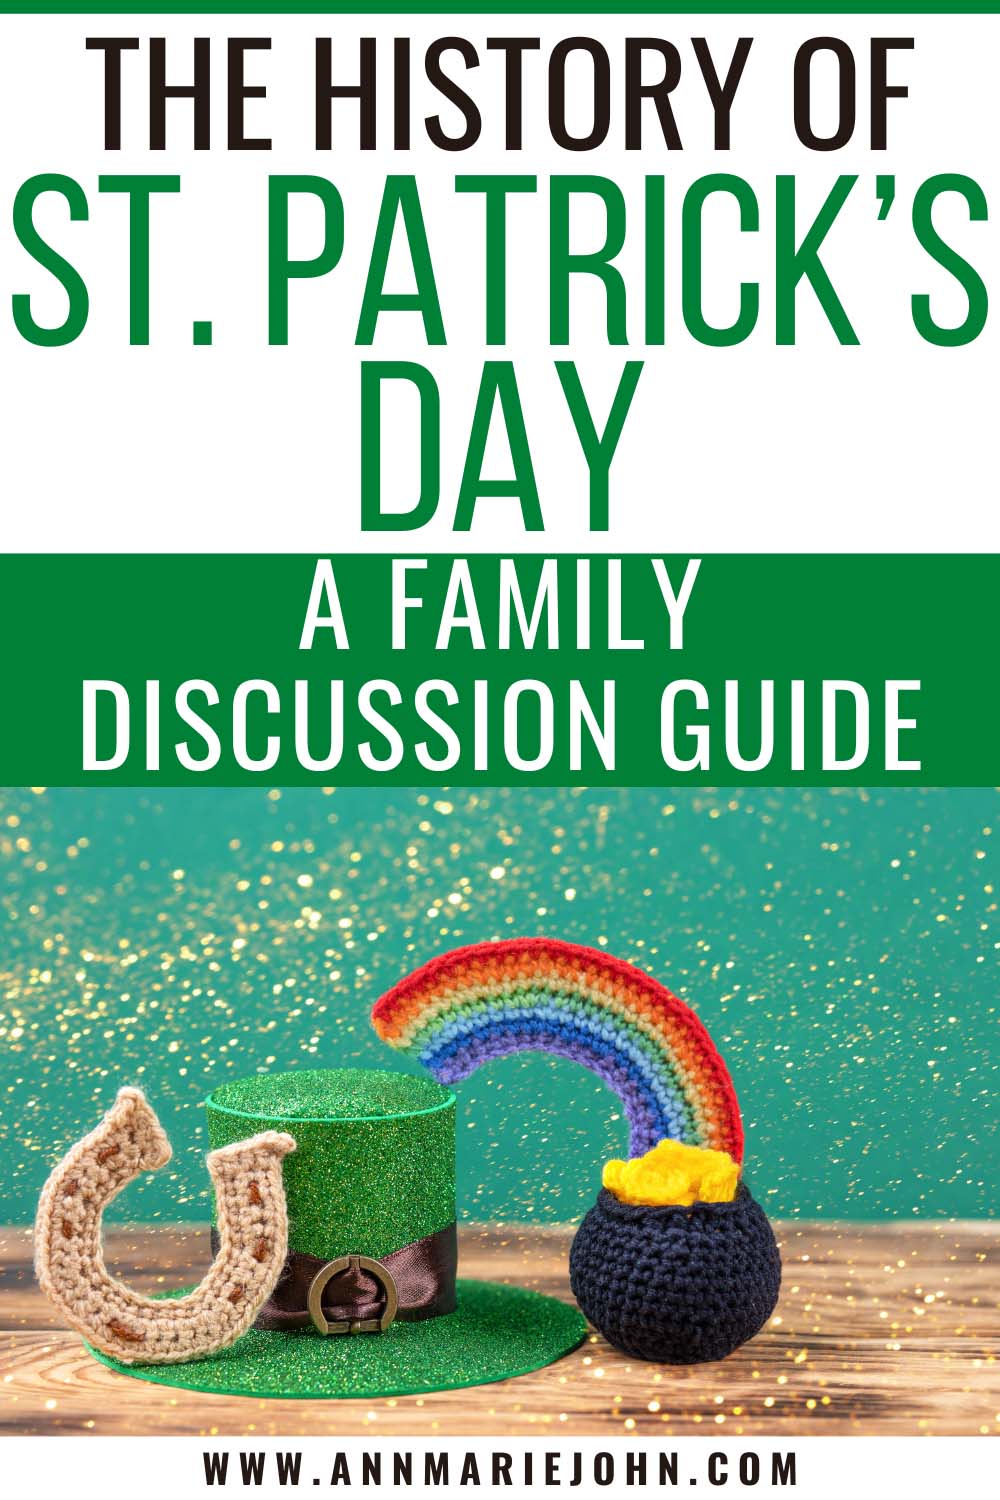 The History of St. Patrick's Day: A Family Discussion Guide